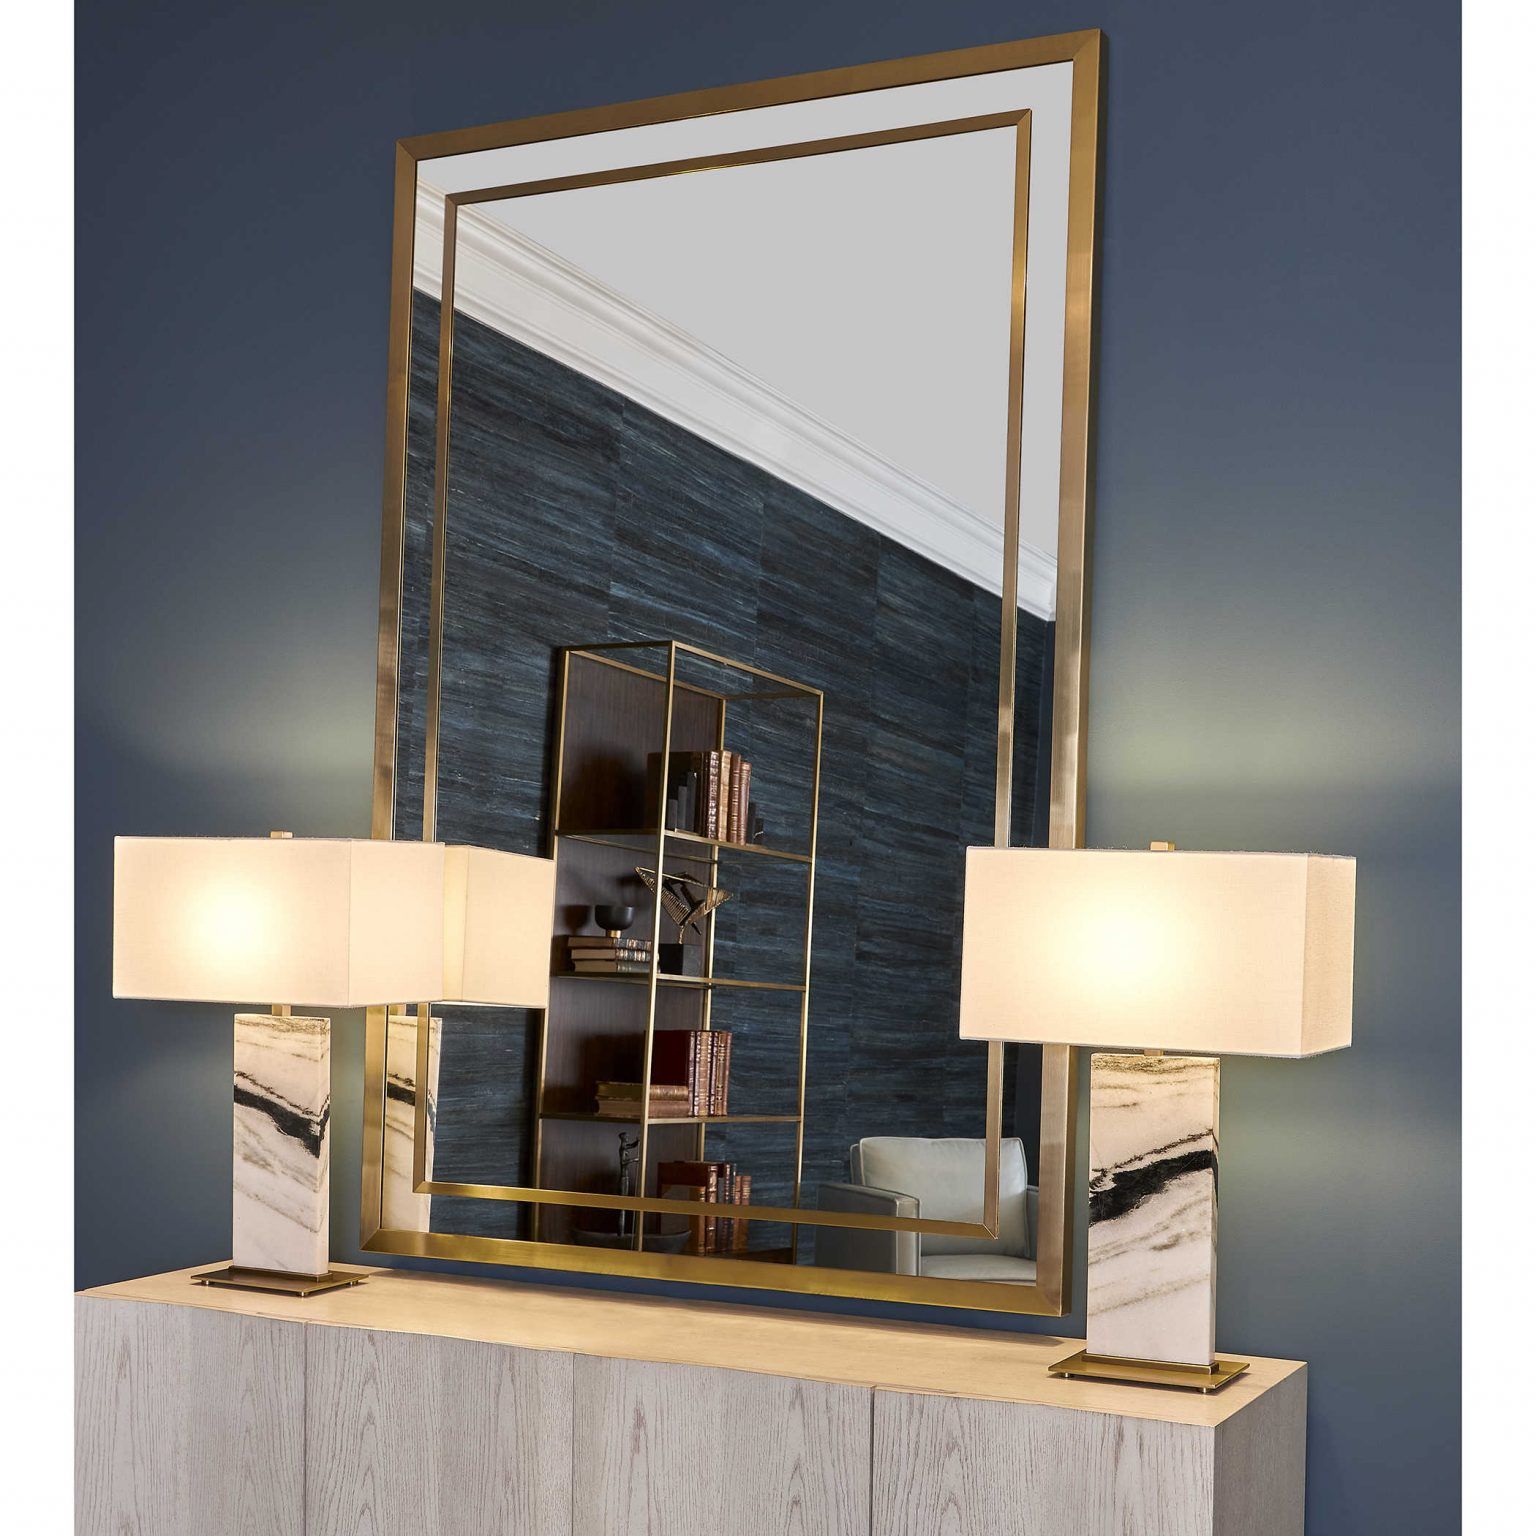 Gold lined mirrors with gold and lamps bring a retro-modern glow